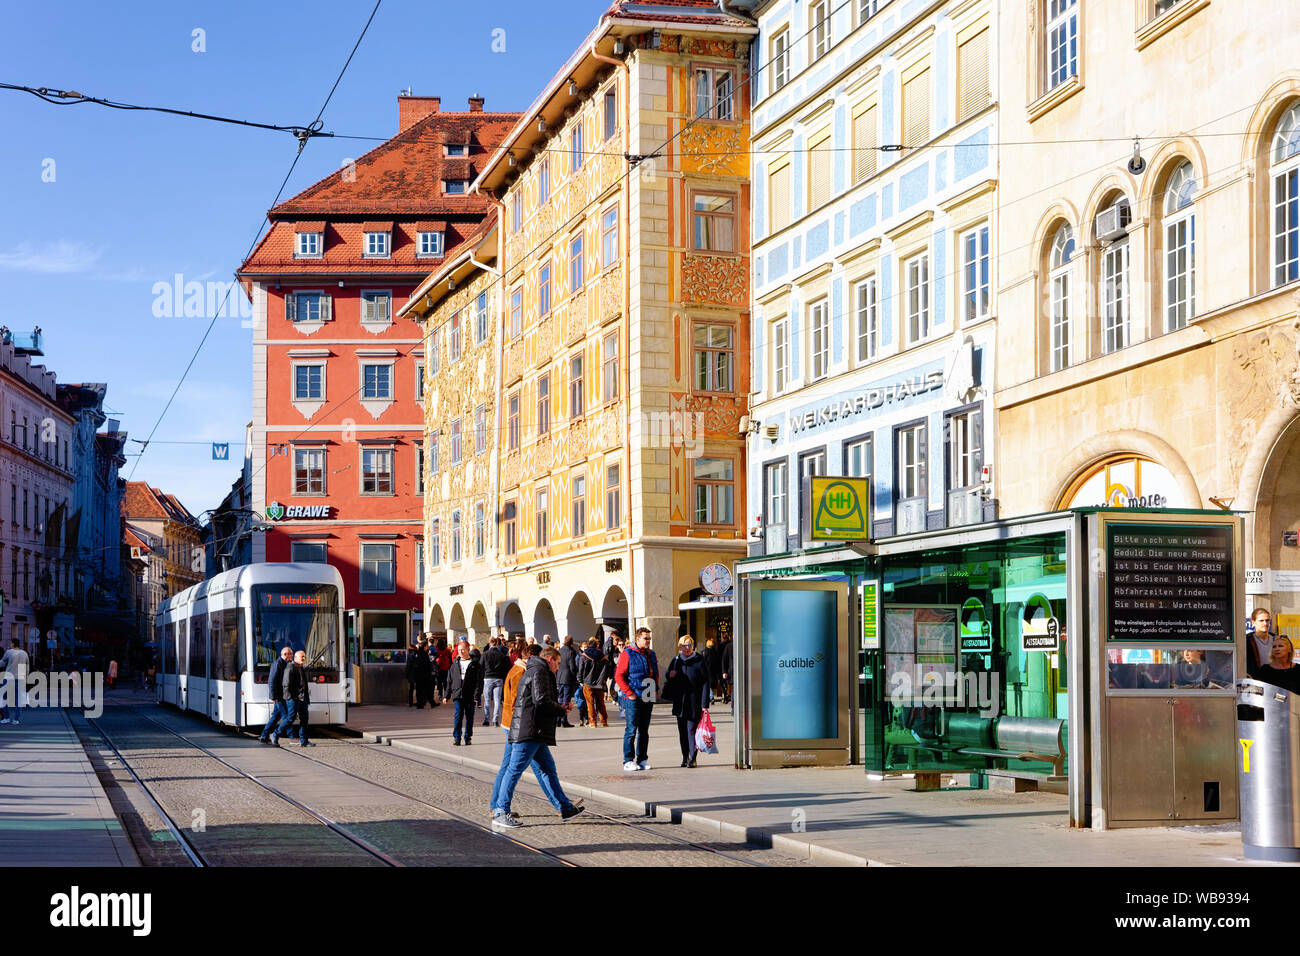 Graz, Austria - February 16, 2019: Tram and people at bus stop on  Herrengasse Street in Downtown